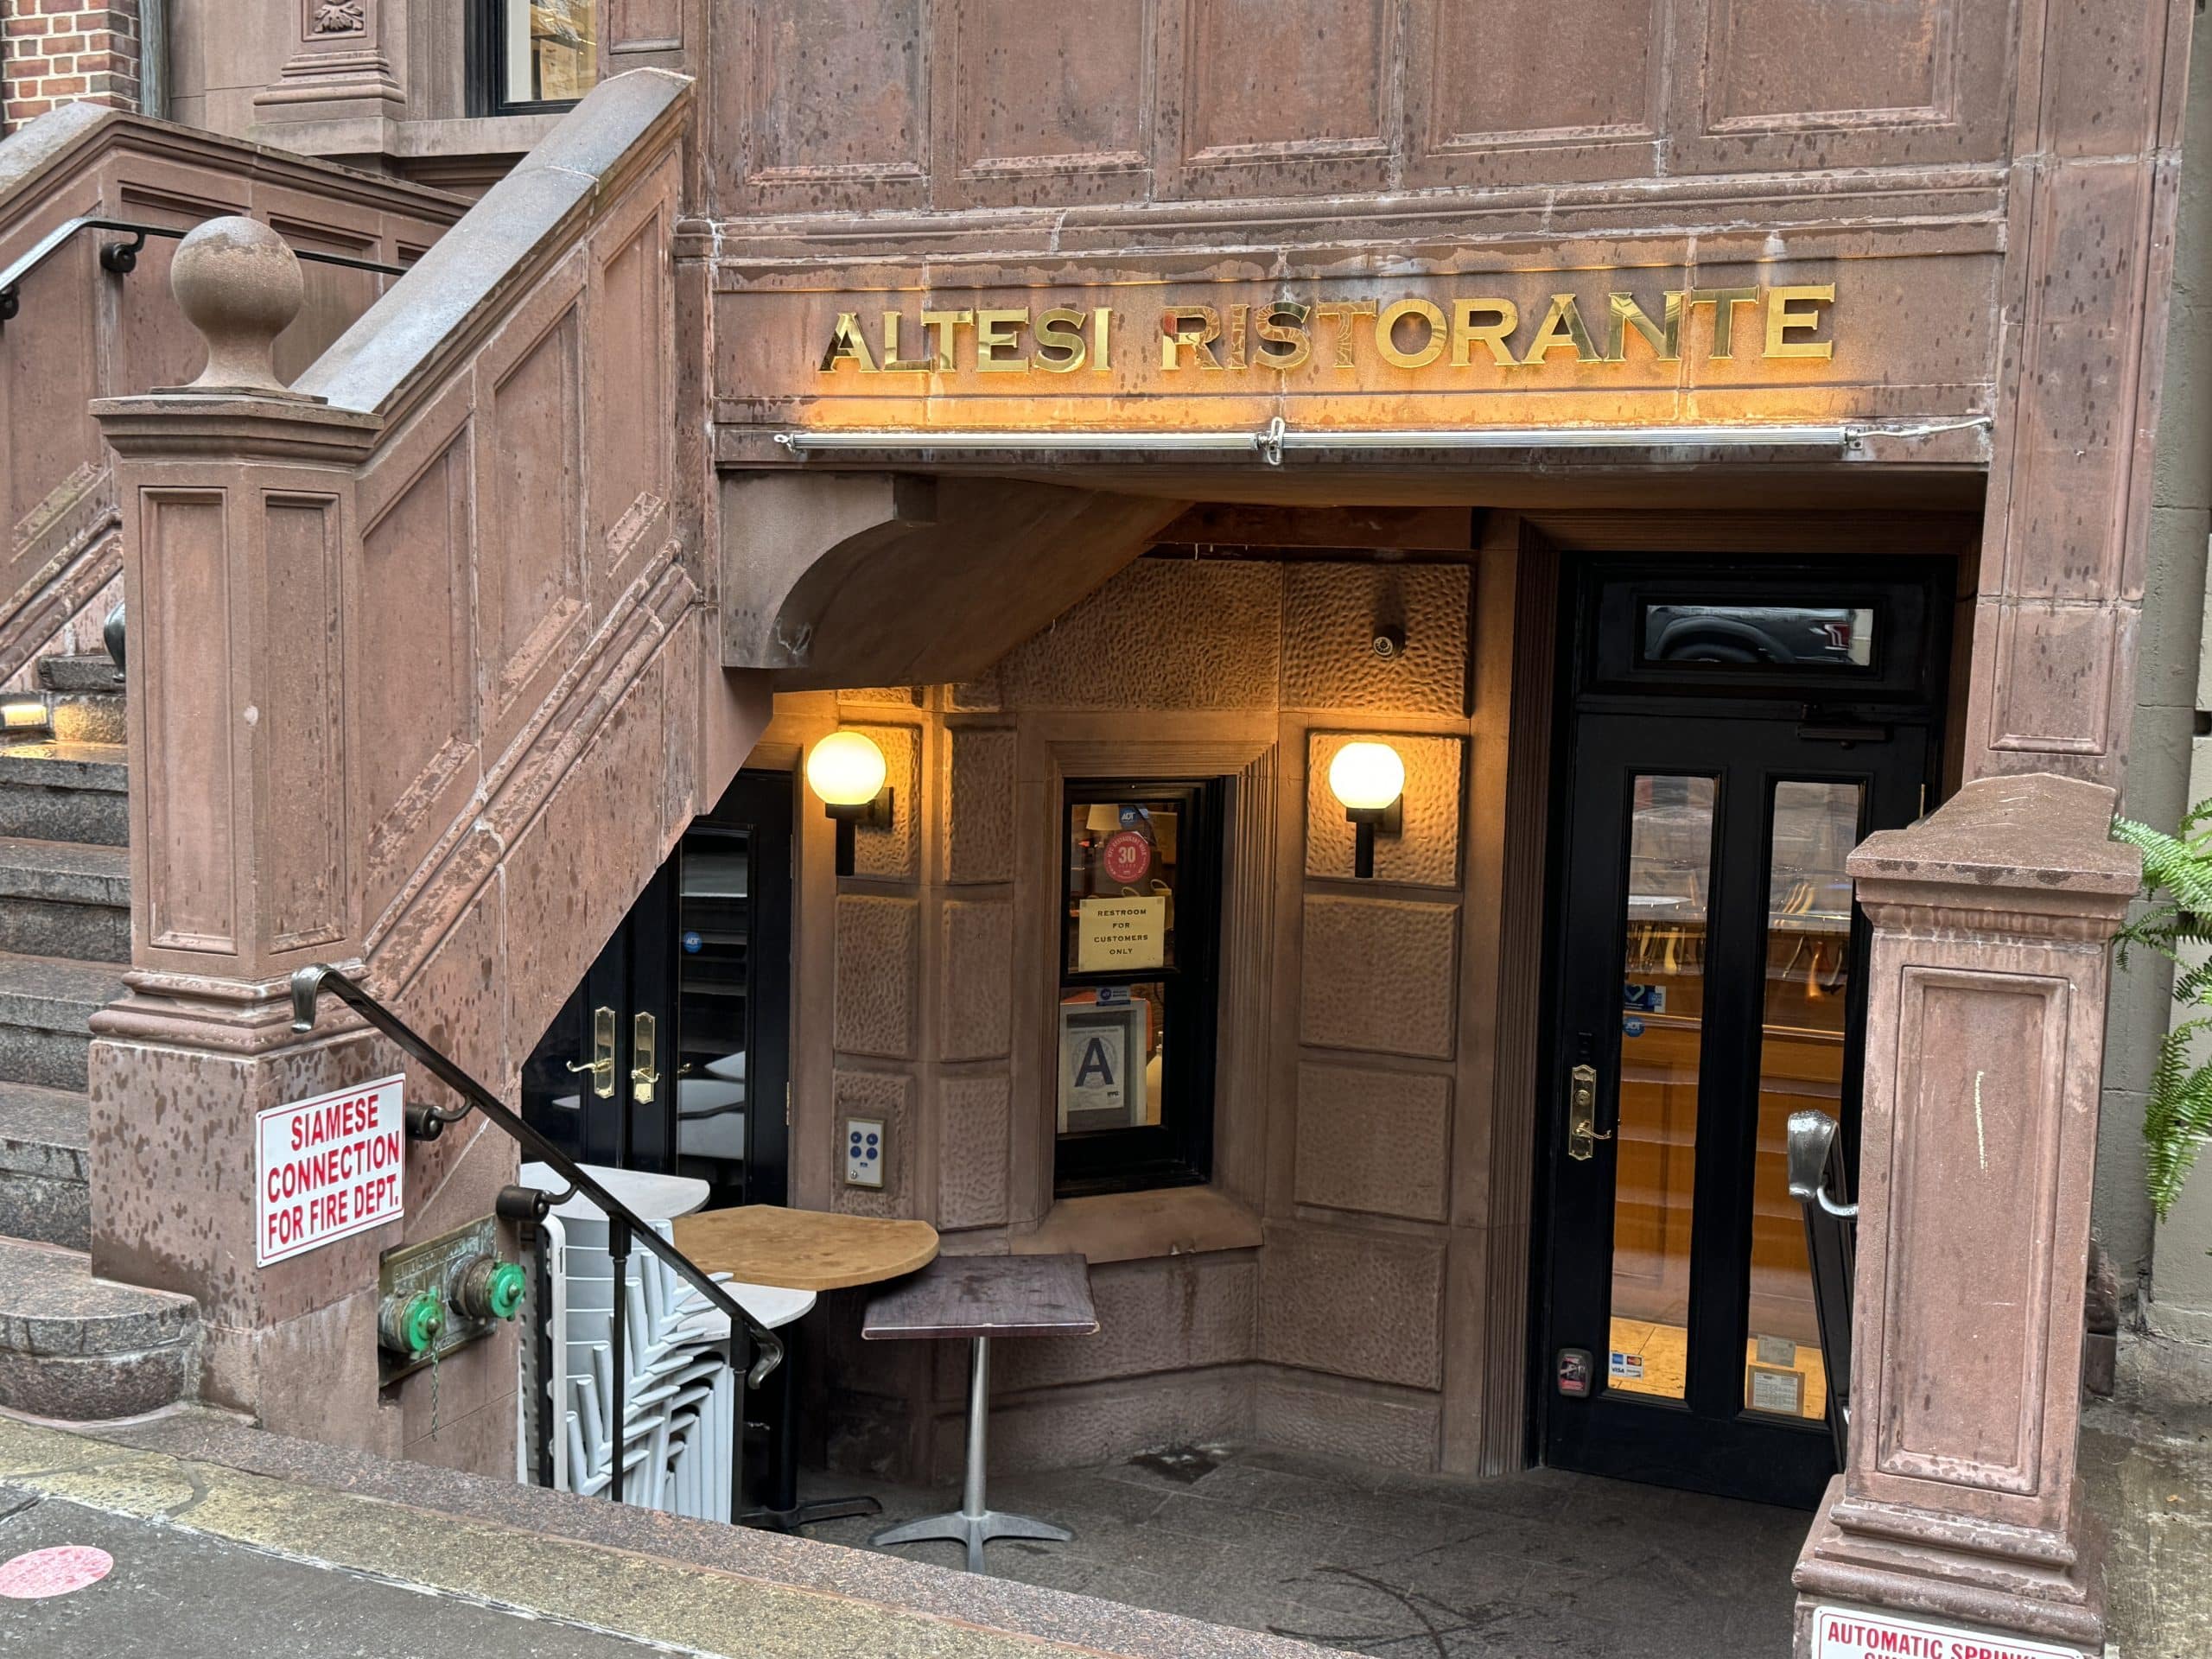 Photo shows a staircase leading down front he sidewalk to the lower level of a building with a glass doors at the booth. A sign above the entrance reads "ALTESI RISTORANTE."